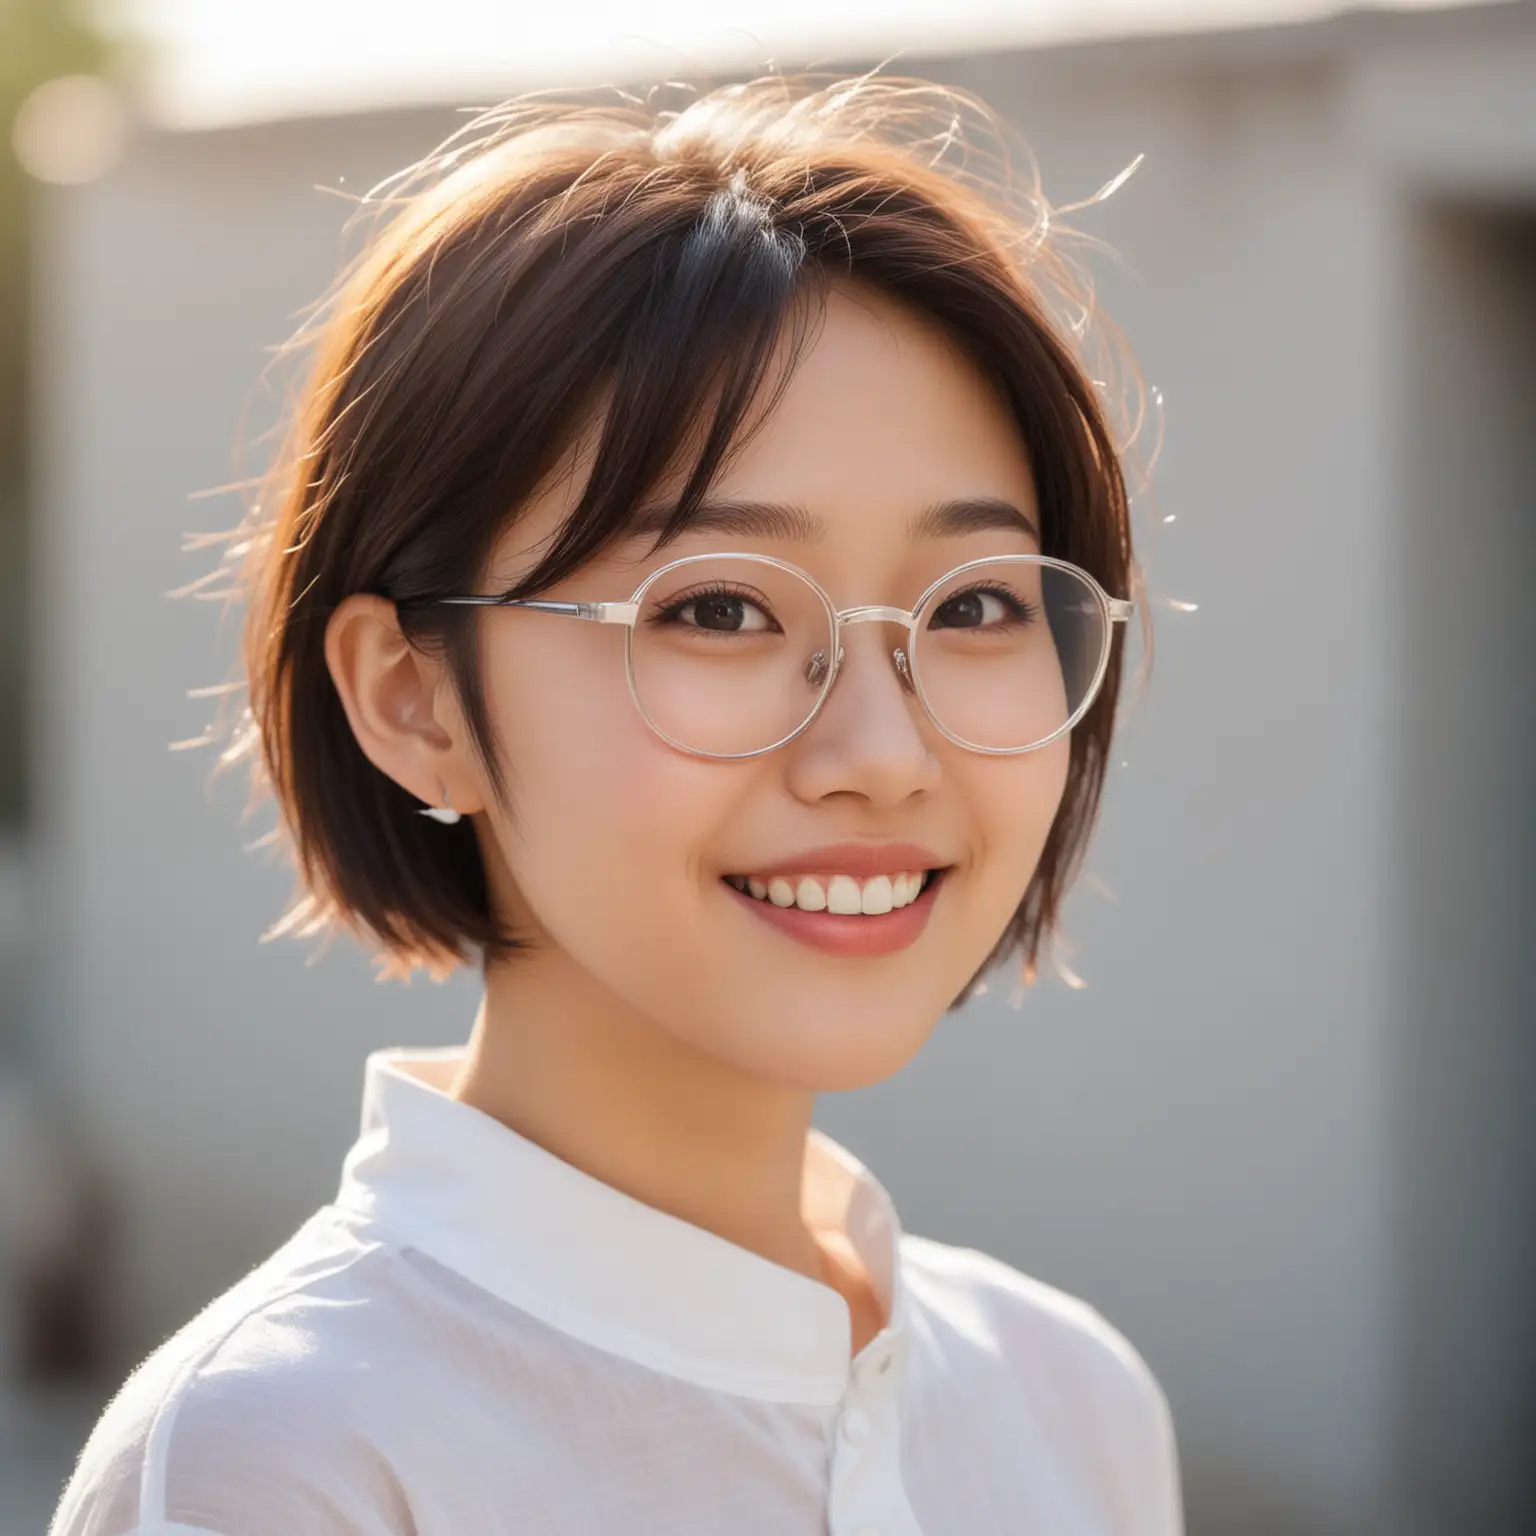 Chinese-Girl-with-Sunny-Smile-in-White-Clothing-and-Glasses